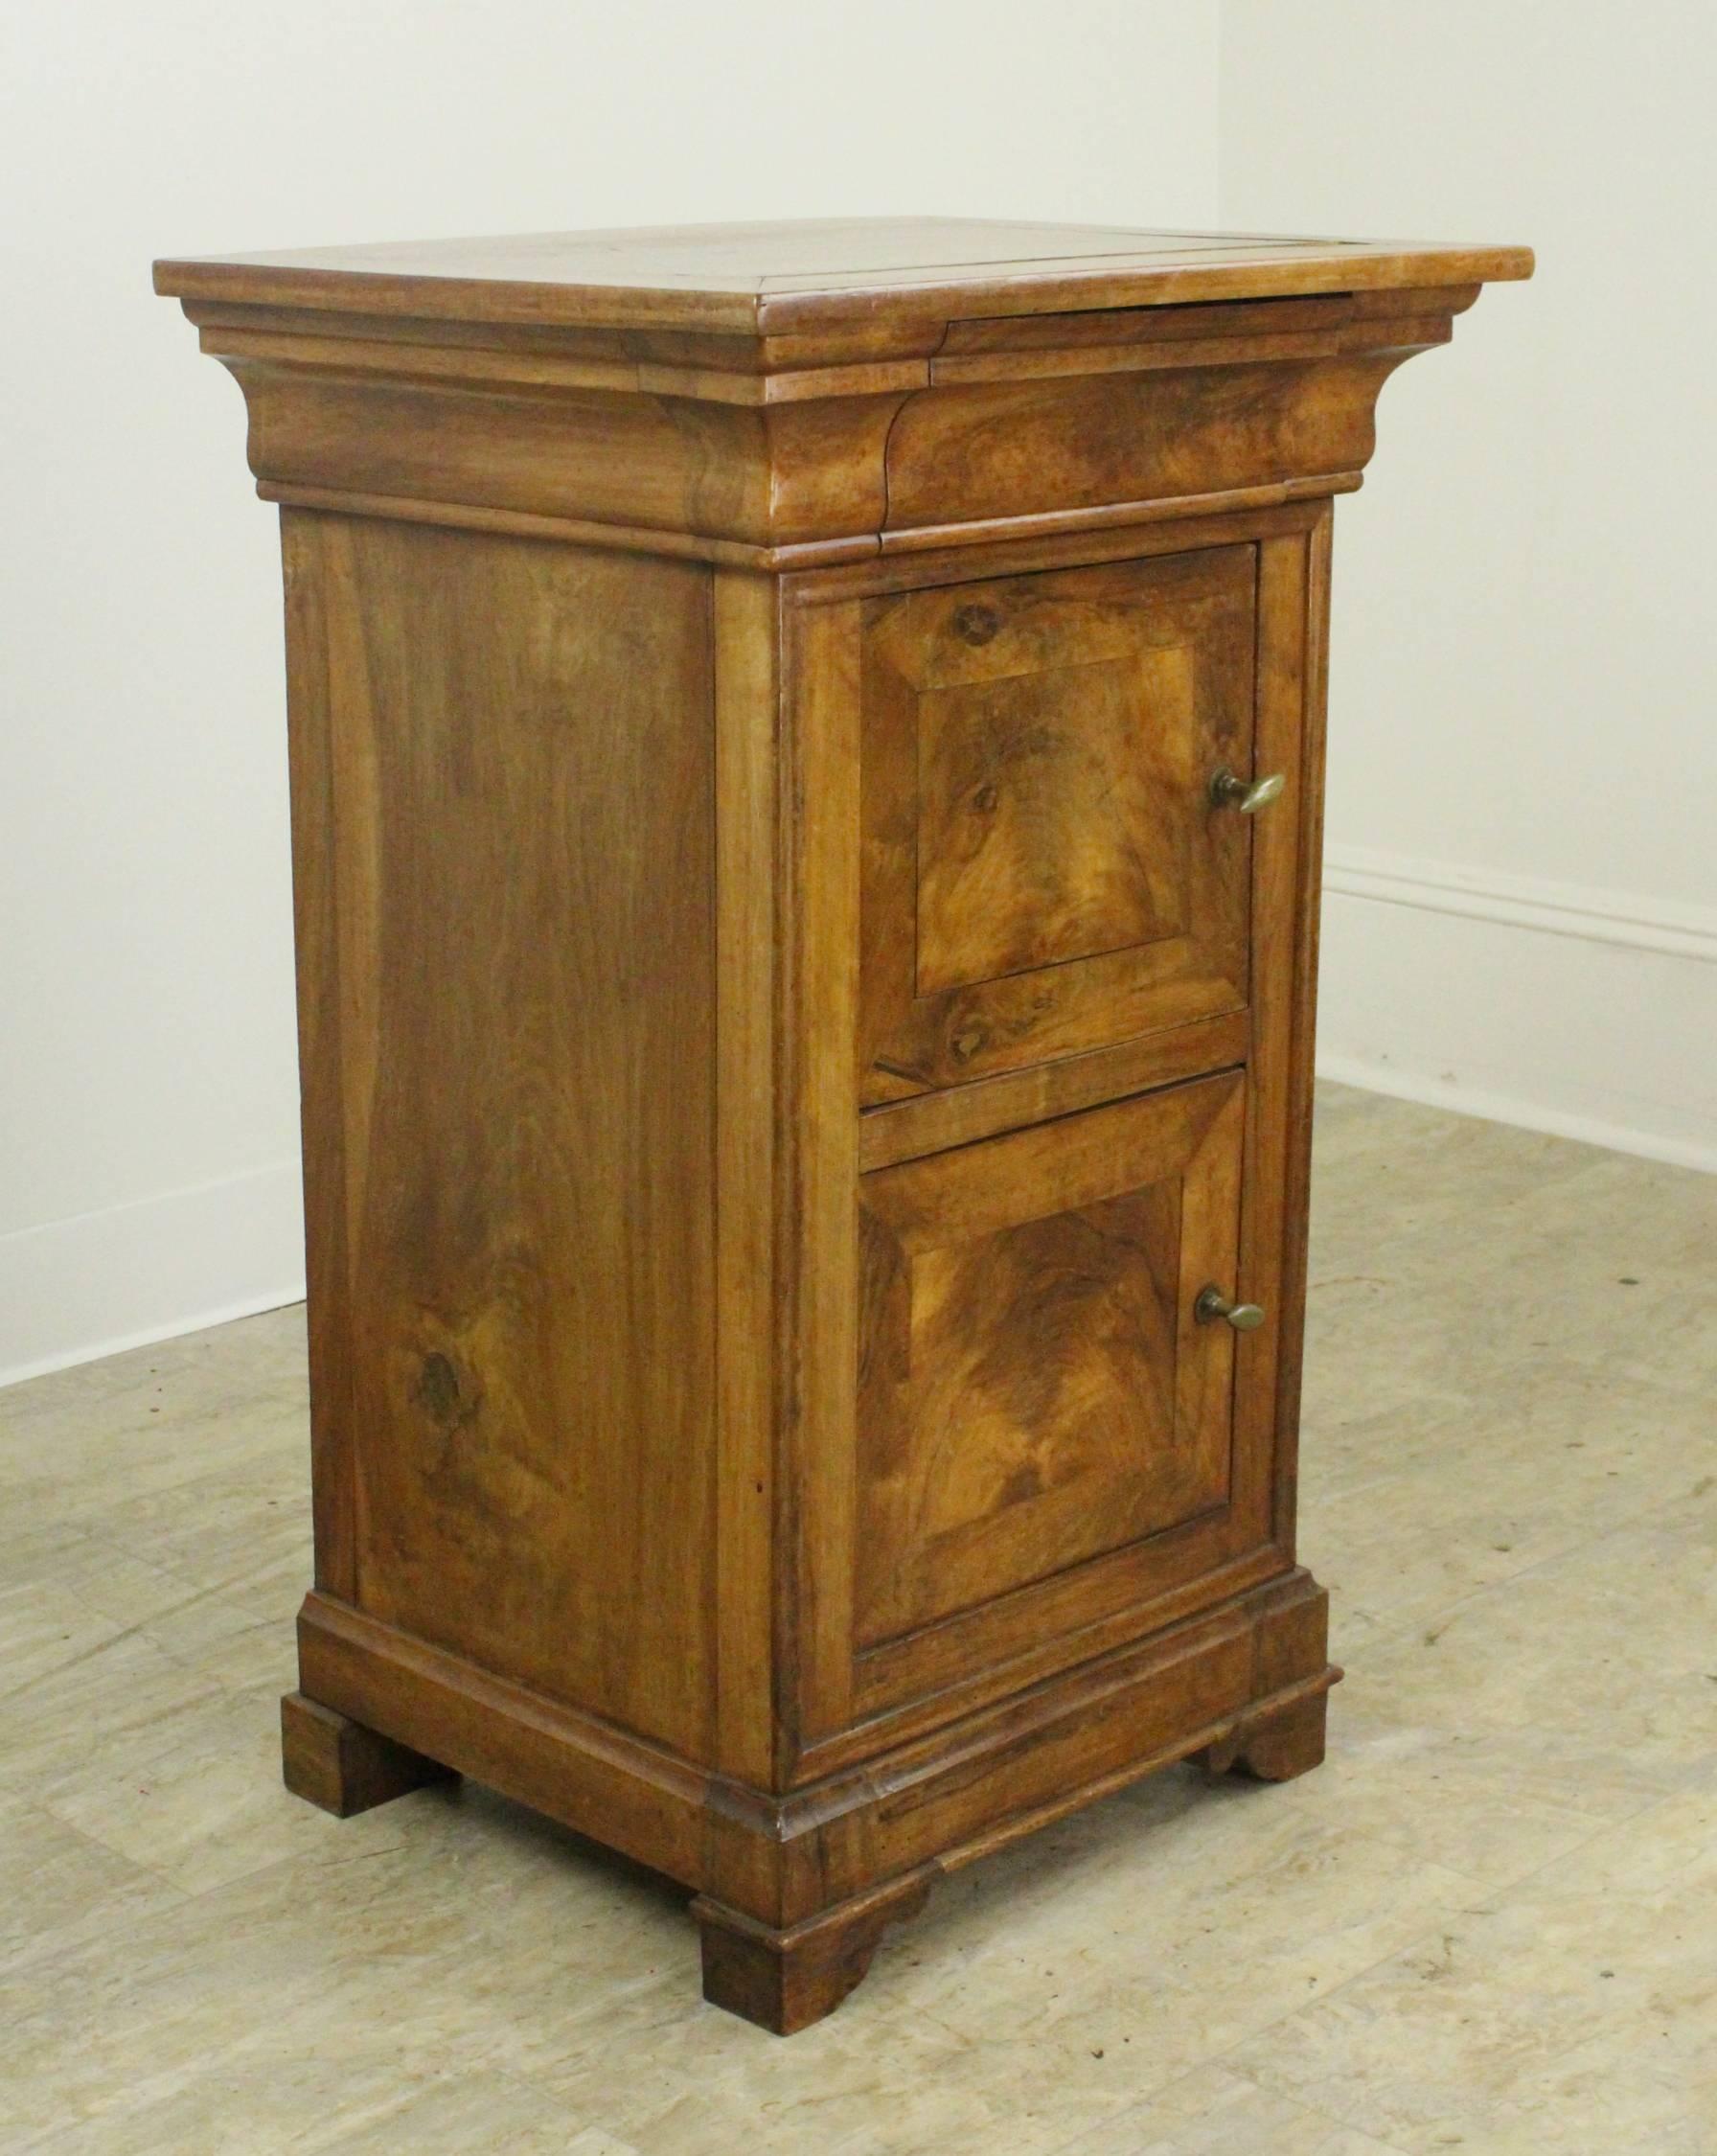 A hard-to-find pair of Louis Philippe walnut nightstands. Dramatically colored and grained tops, doors and sides. Classic mouldings and hidden top drawers, as well as mitred corners on the tops. The wood has fabulous patina and glow. Please note